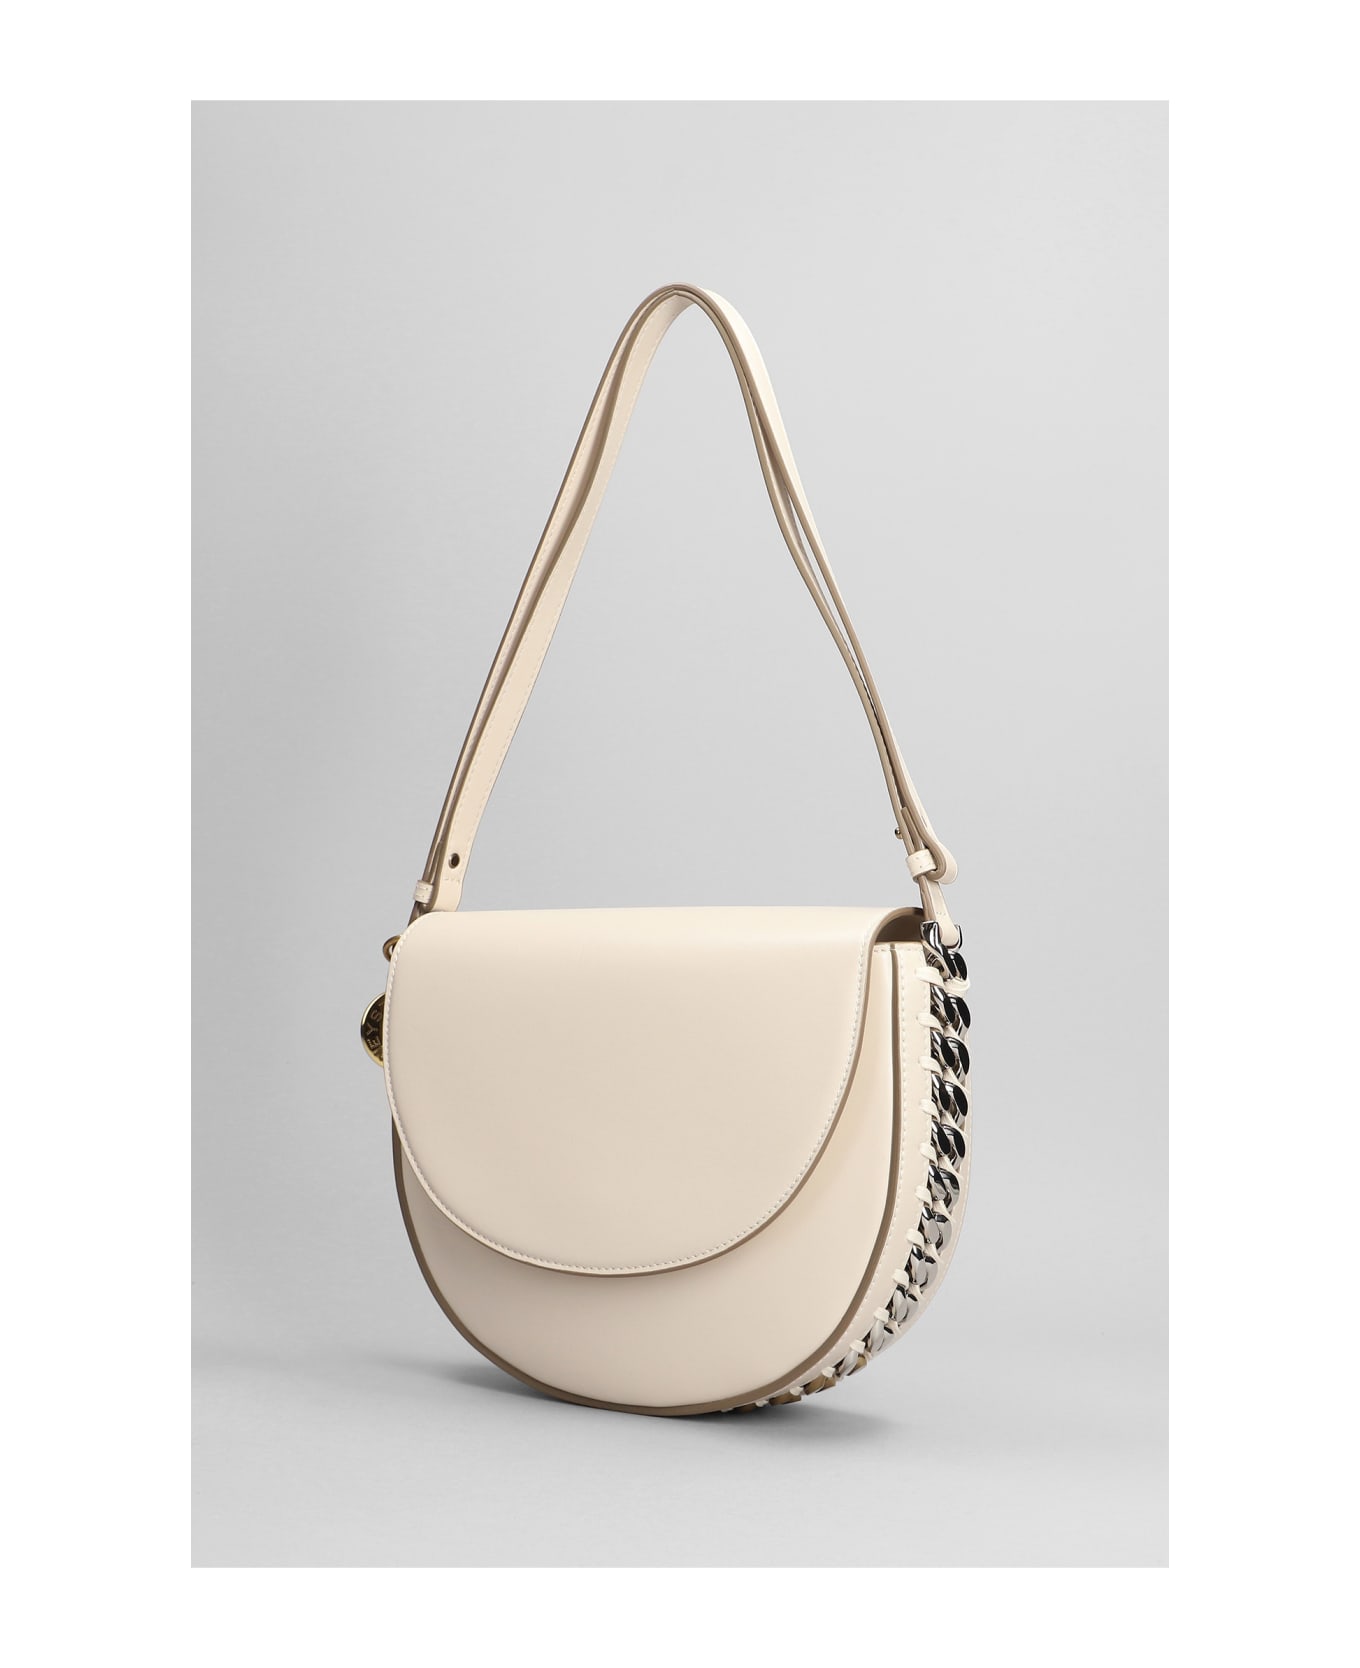 Stella McCartney Hand Bag In White Faux Leather - white